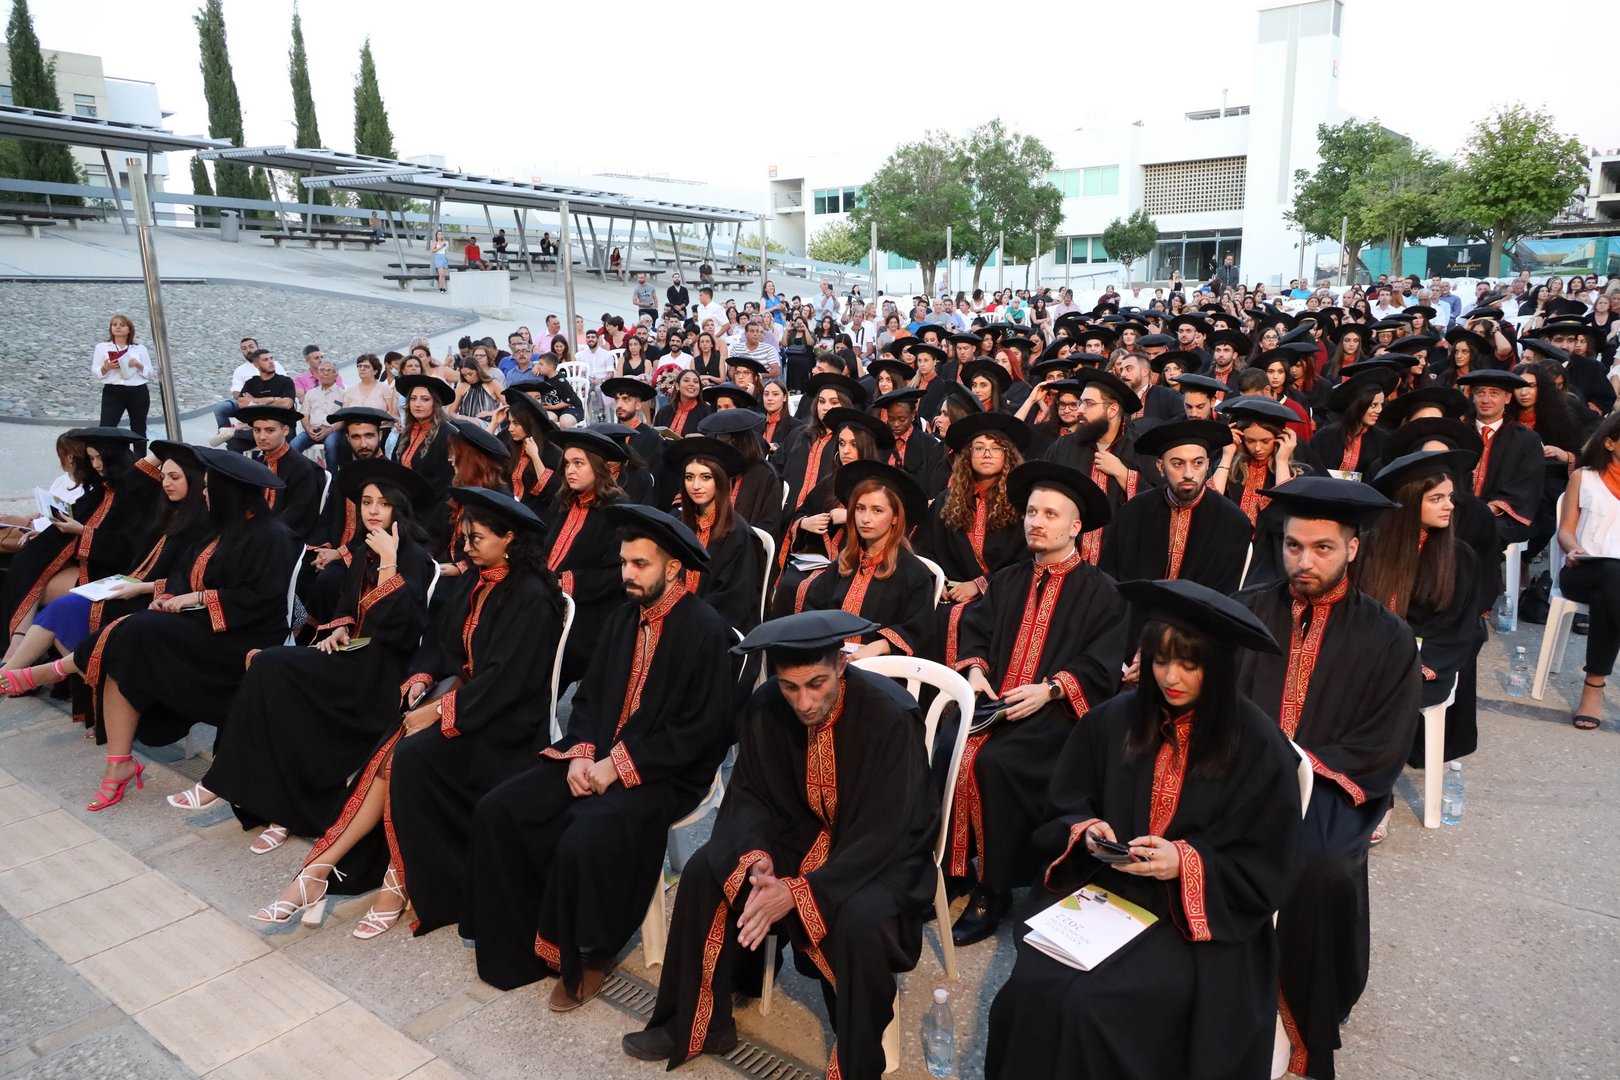 image 59 per cent of Cypriots aged 25 &#8211; 34 hold tertiary degrees